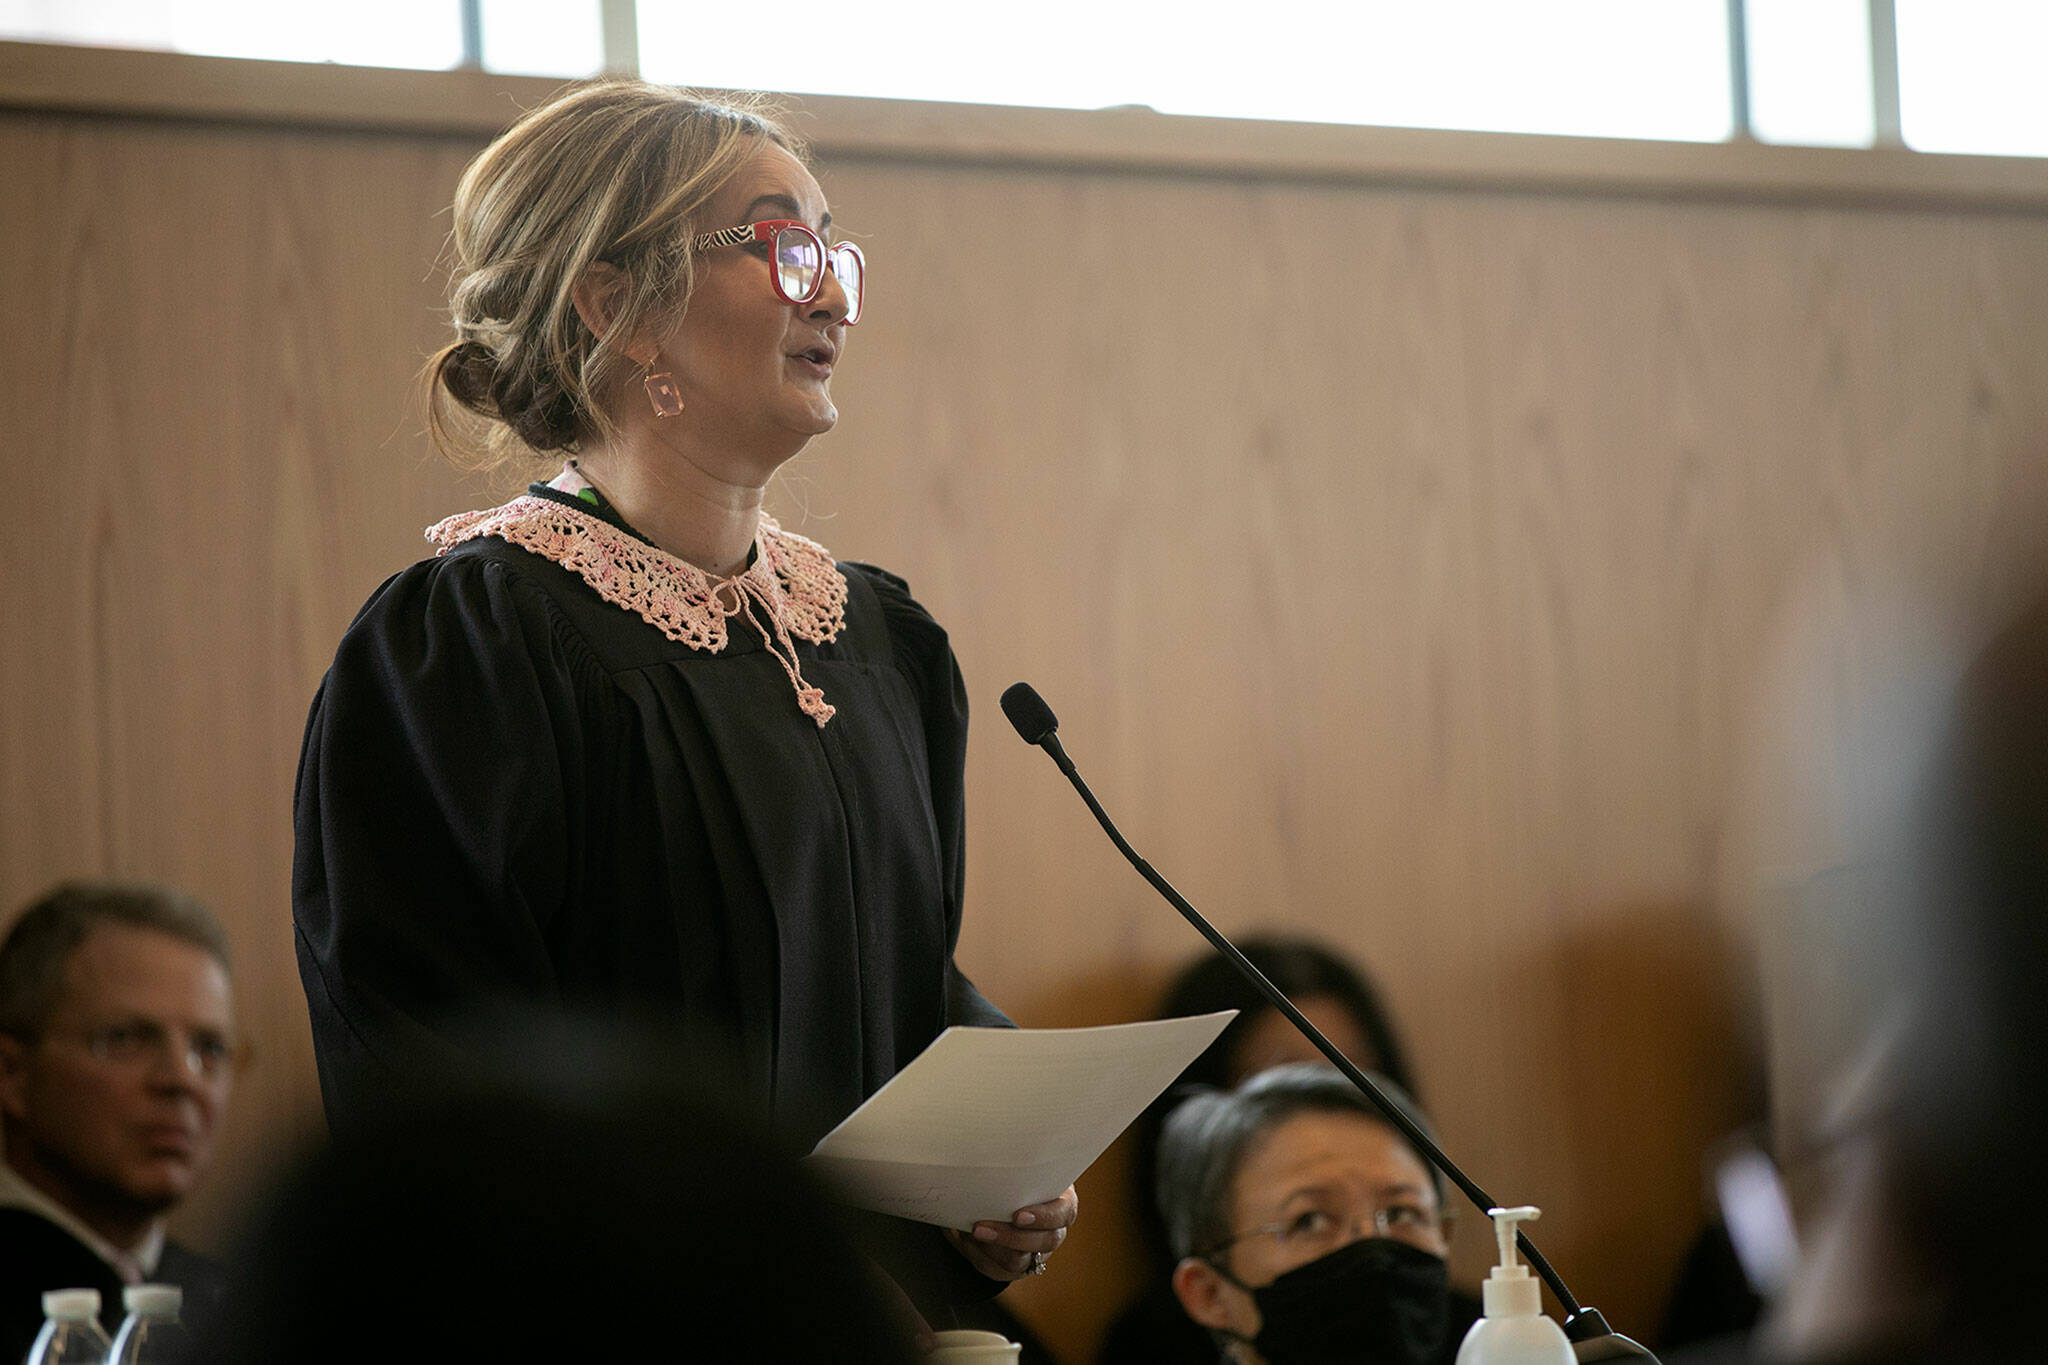 Judge Anna Alexander speaks during the memorial for Judge Cassandra Lopez-Shaw Thursday at the Snohomish County Courthouse in Everett. (Ryan Berry / The Herald)